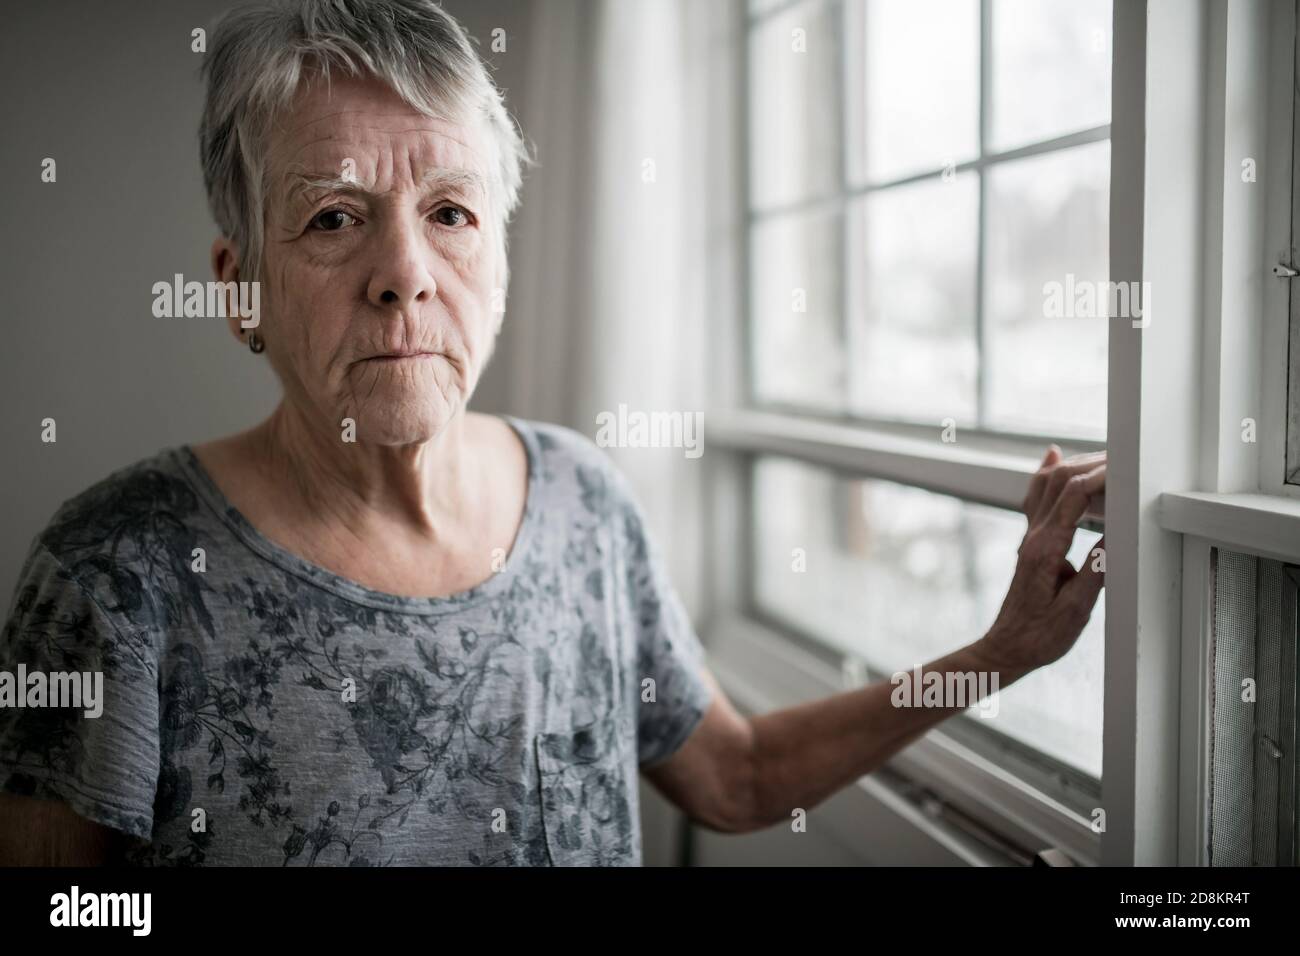 A sad lonely 70 years old senior in is apartment Stock Photo